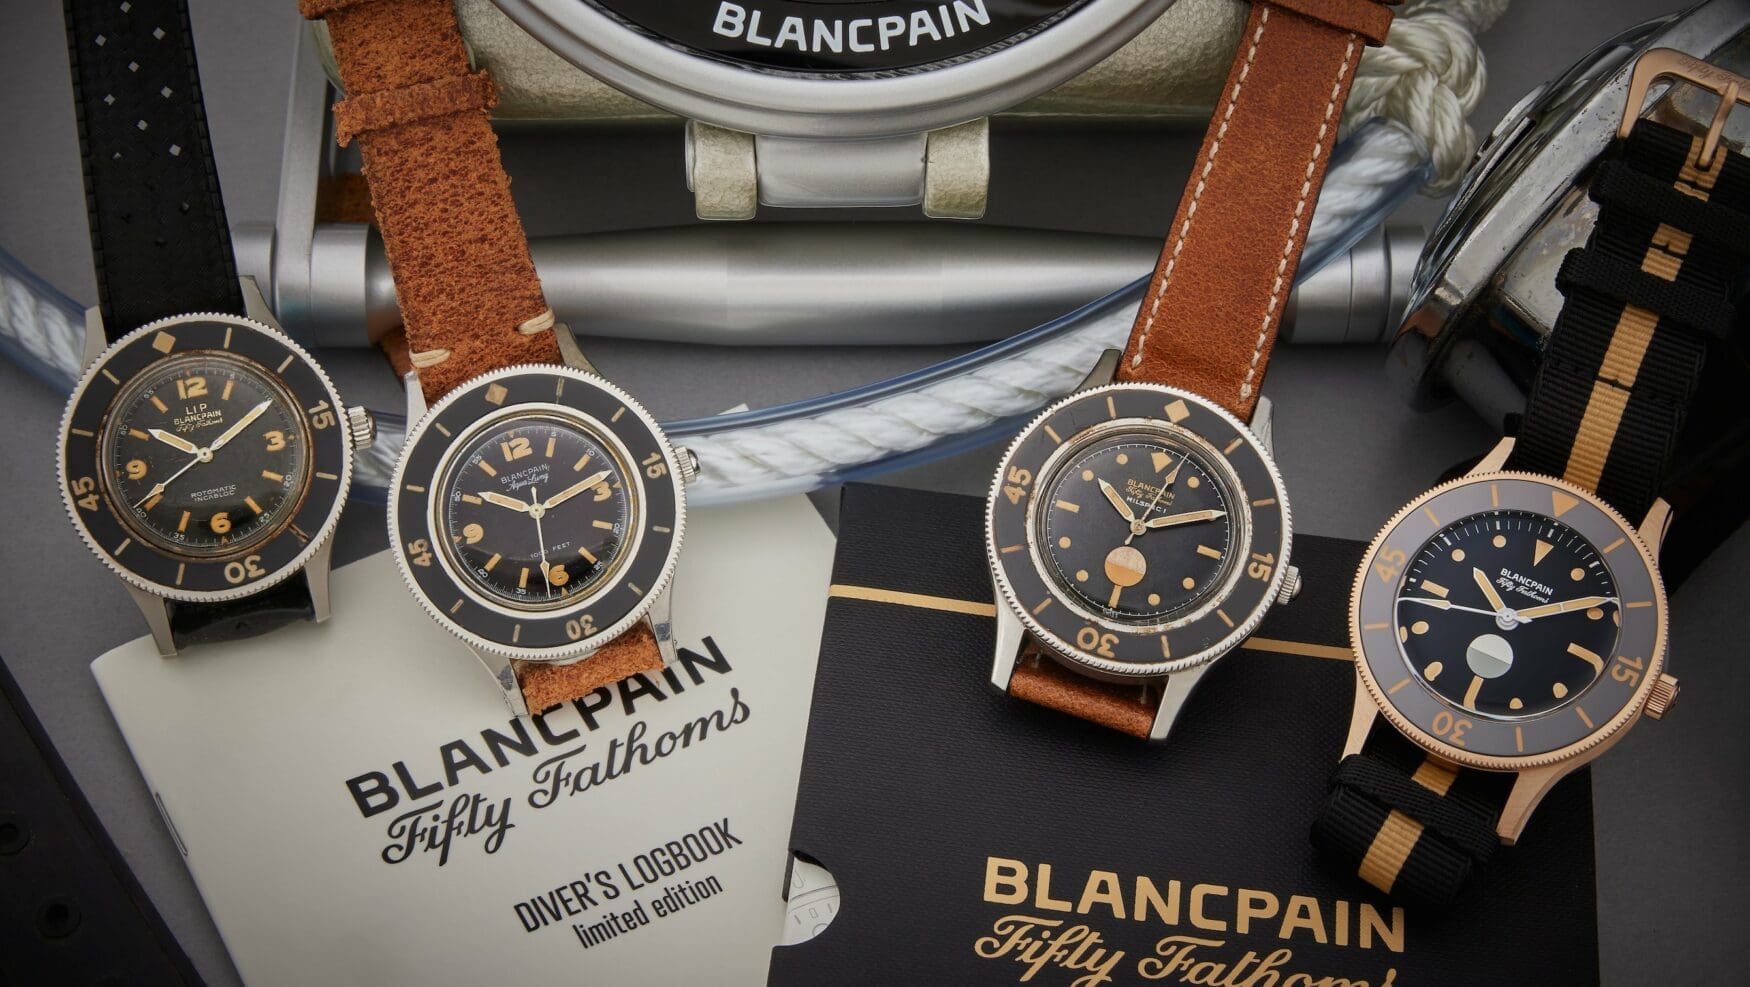 Sotheby’s auctions off #70 of the Blancpain Fifty Fathoms 70th Anniversary Act 3 for charity